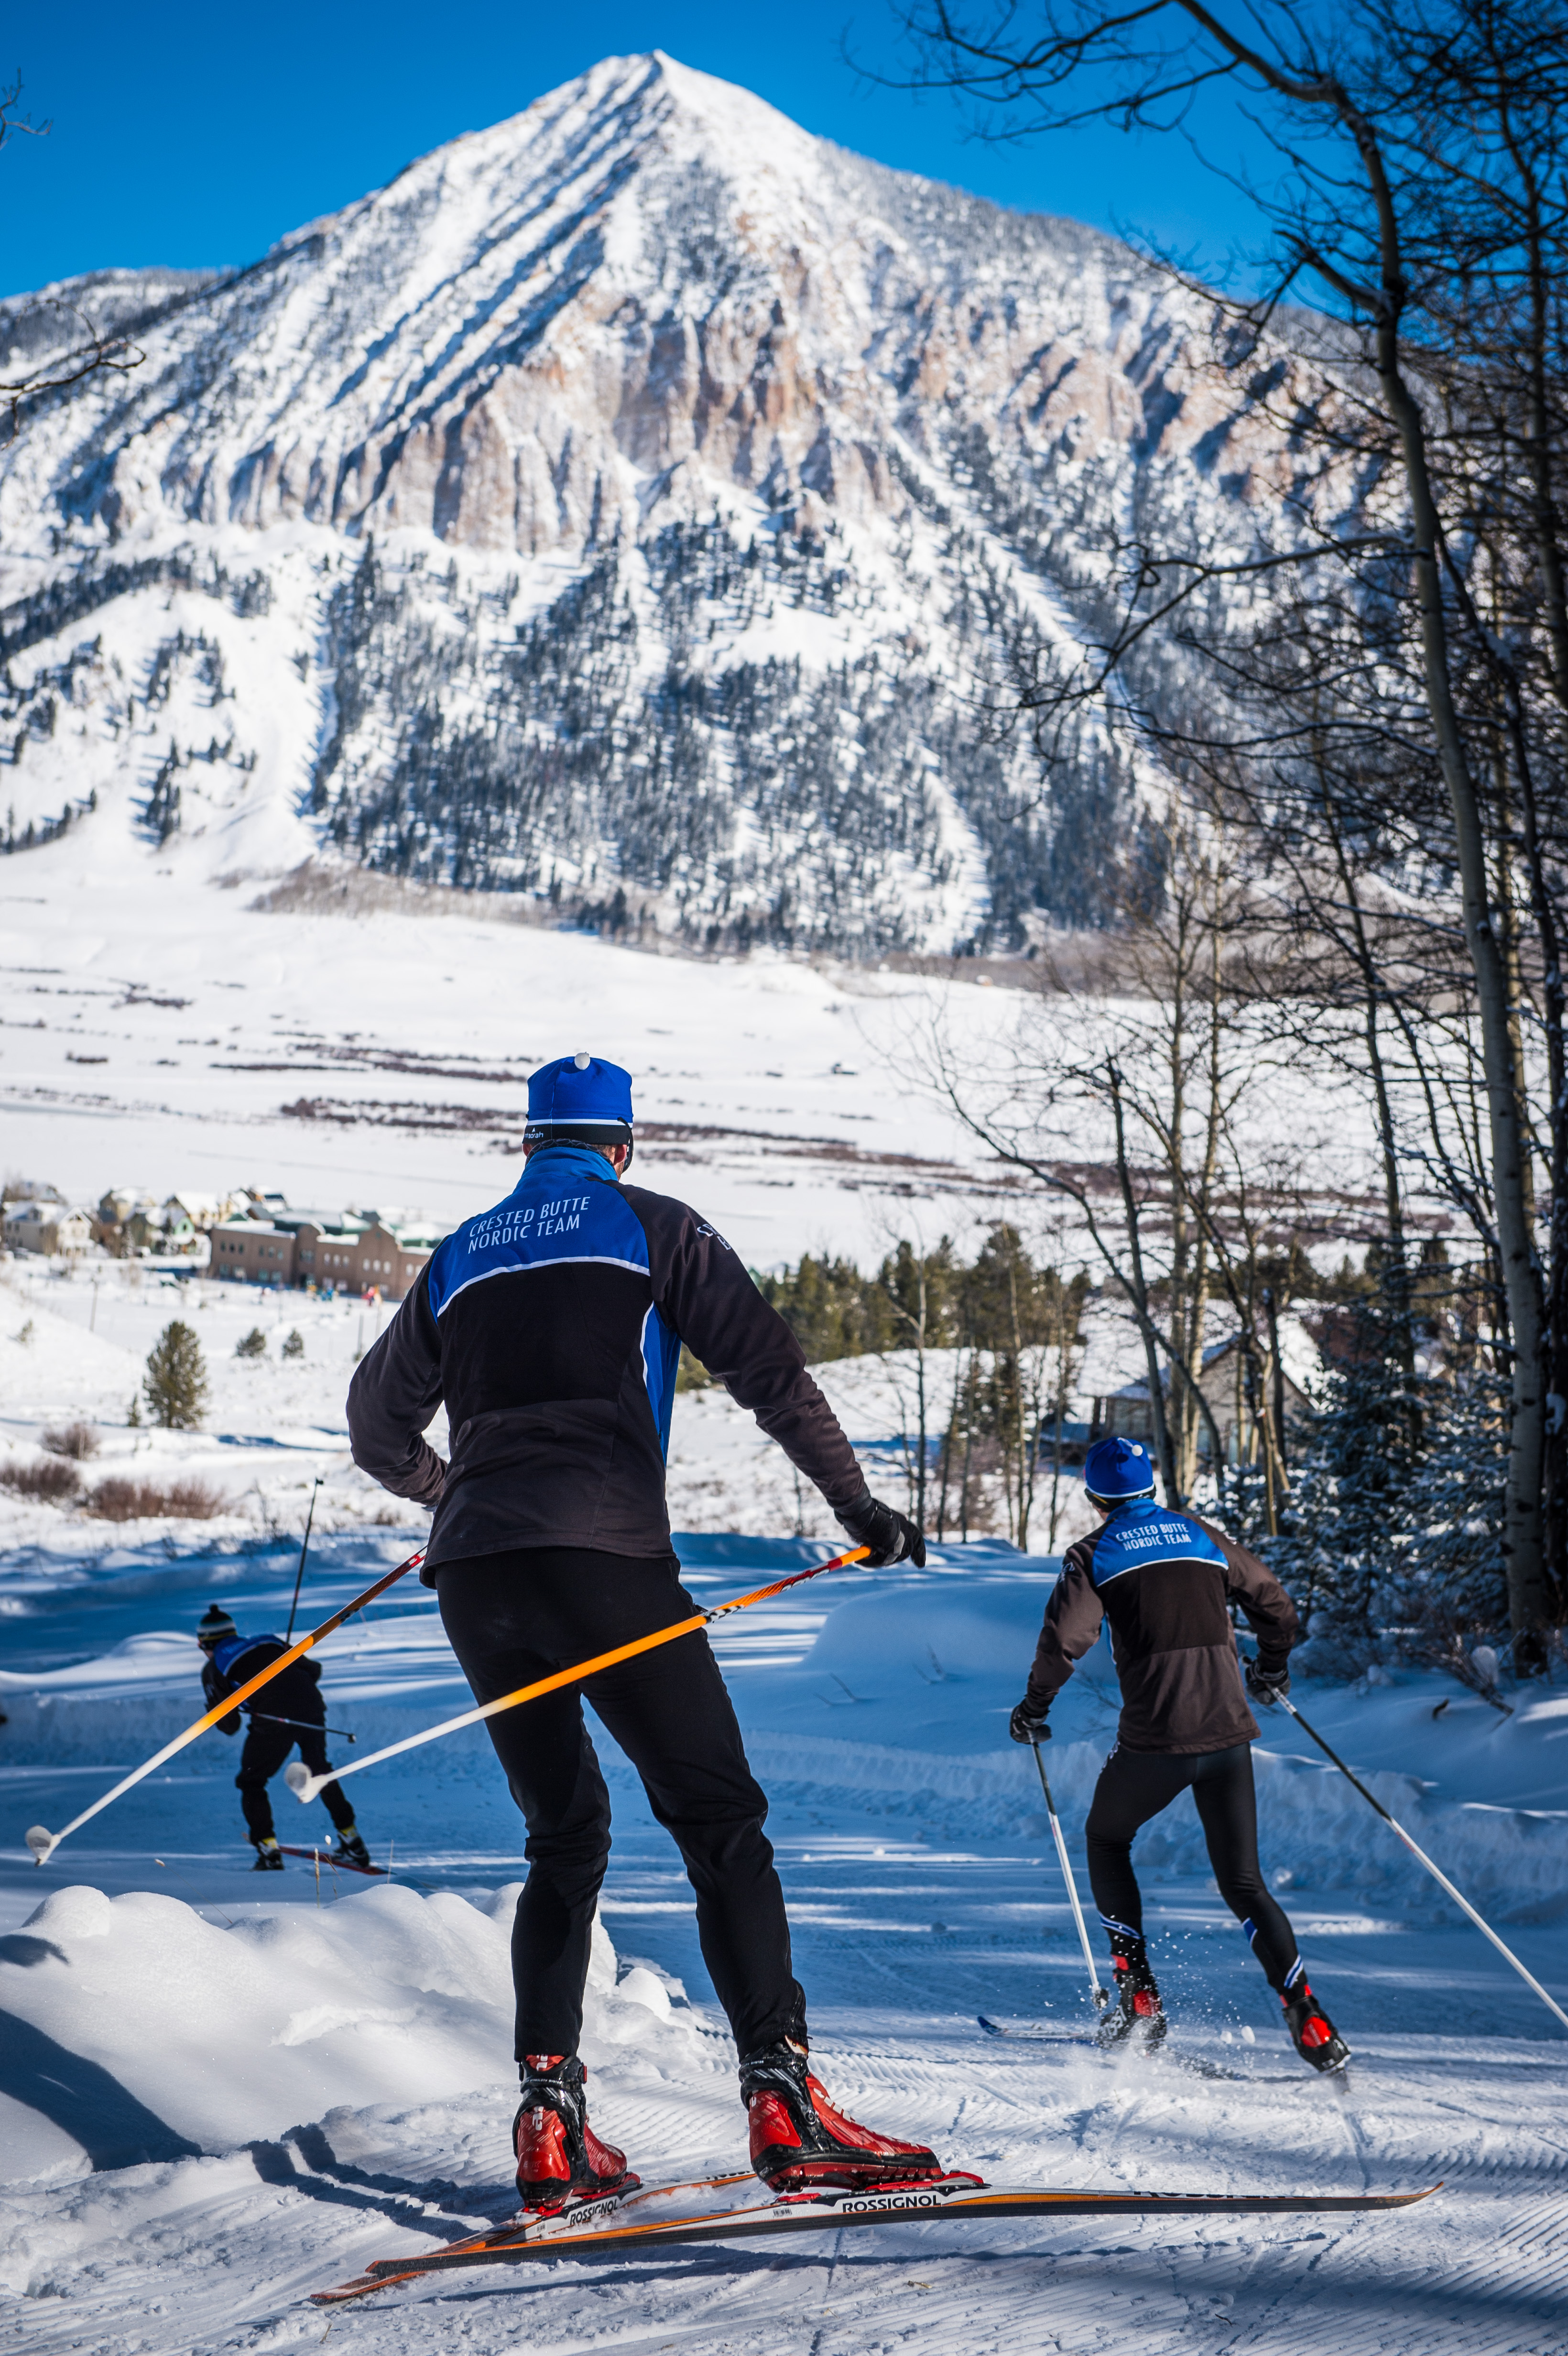 Skiing at Crested Butte Nordic in Colorado. (Photo: Xavier Fane)